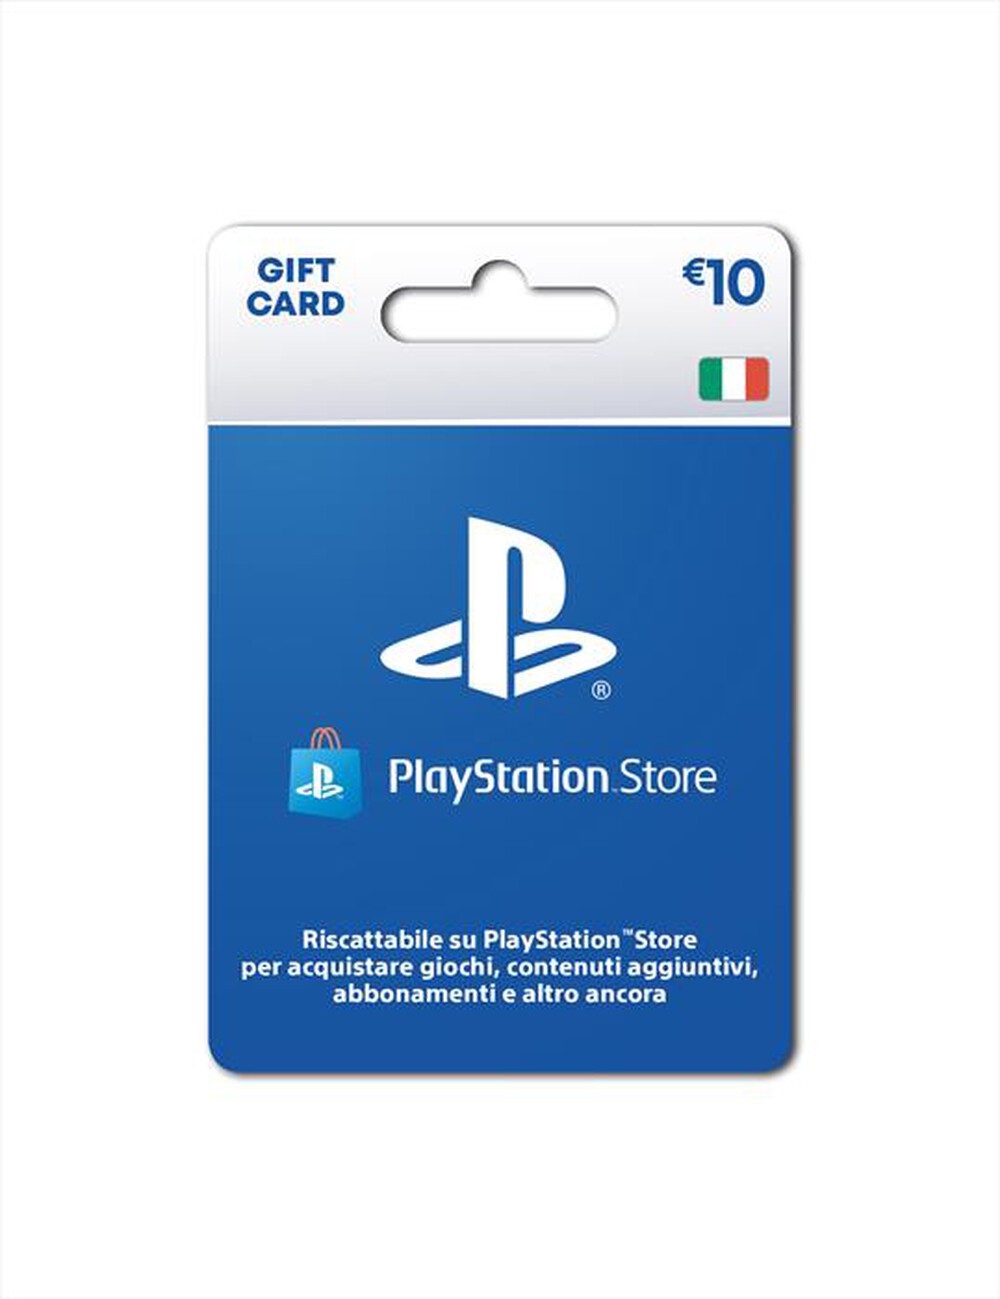 "SONY COMPUTER - PlayStation Network Card 10 € - "